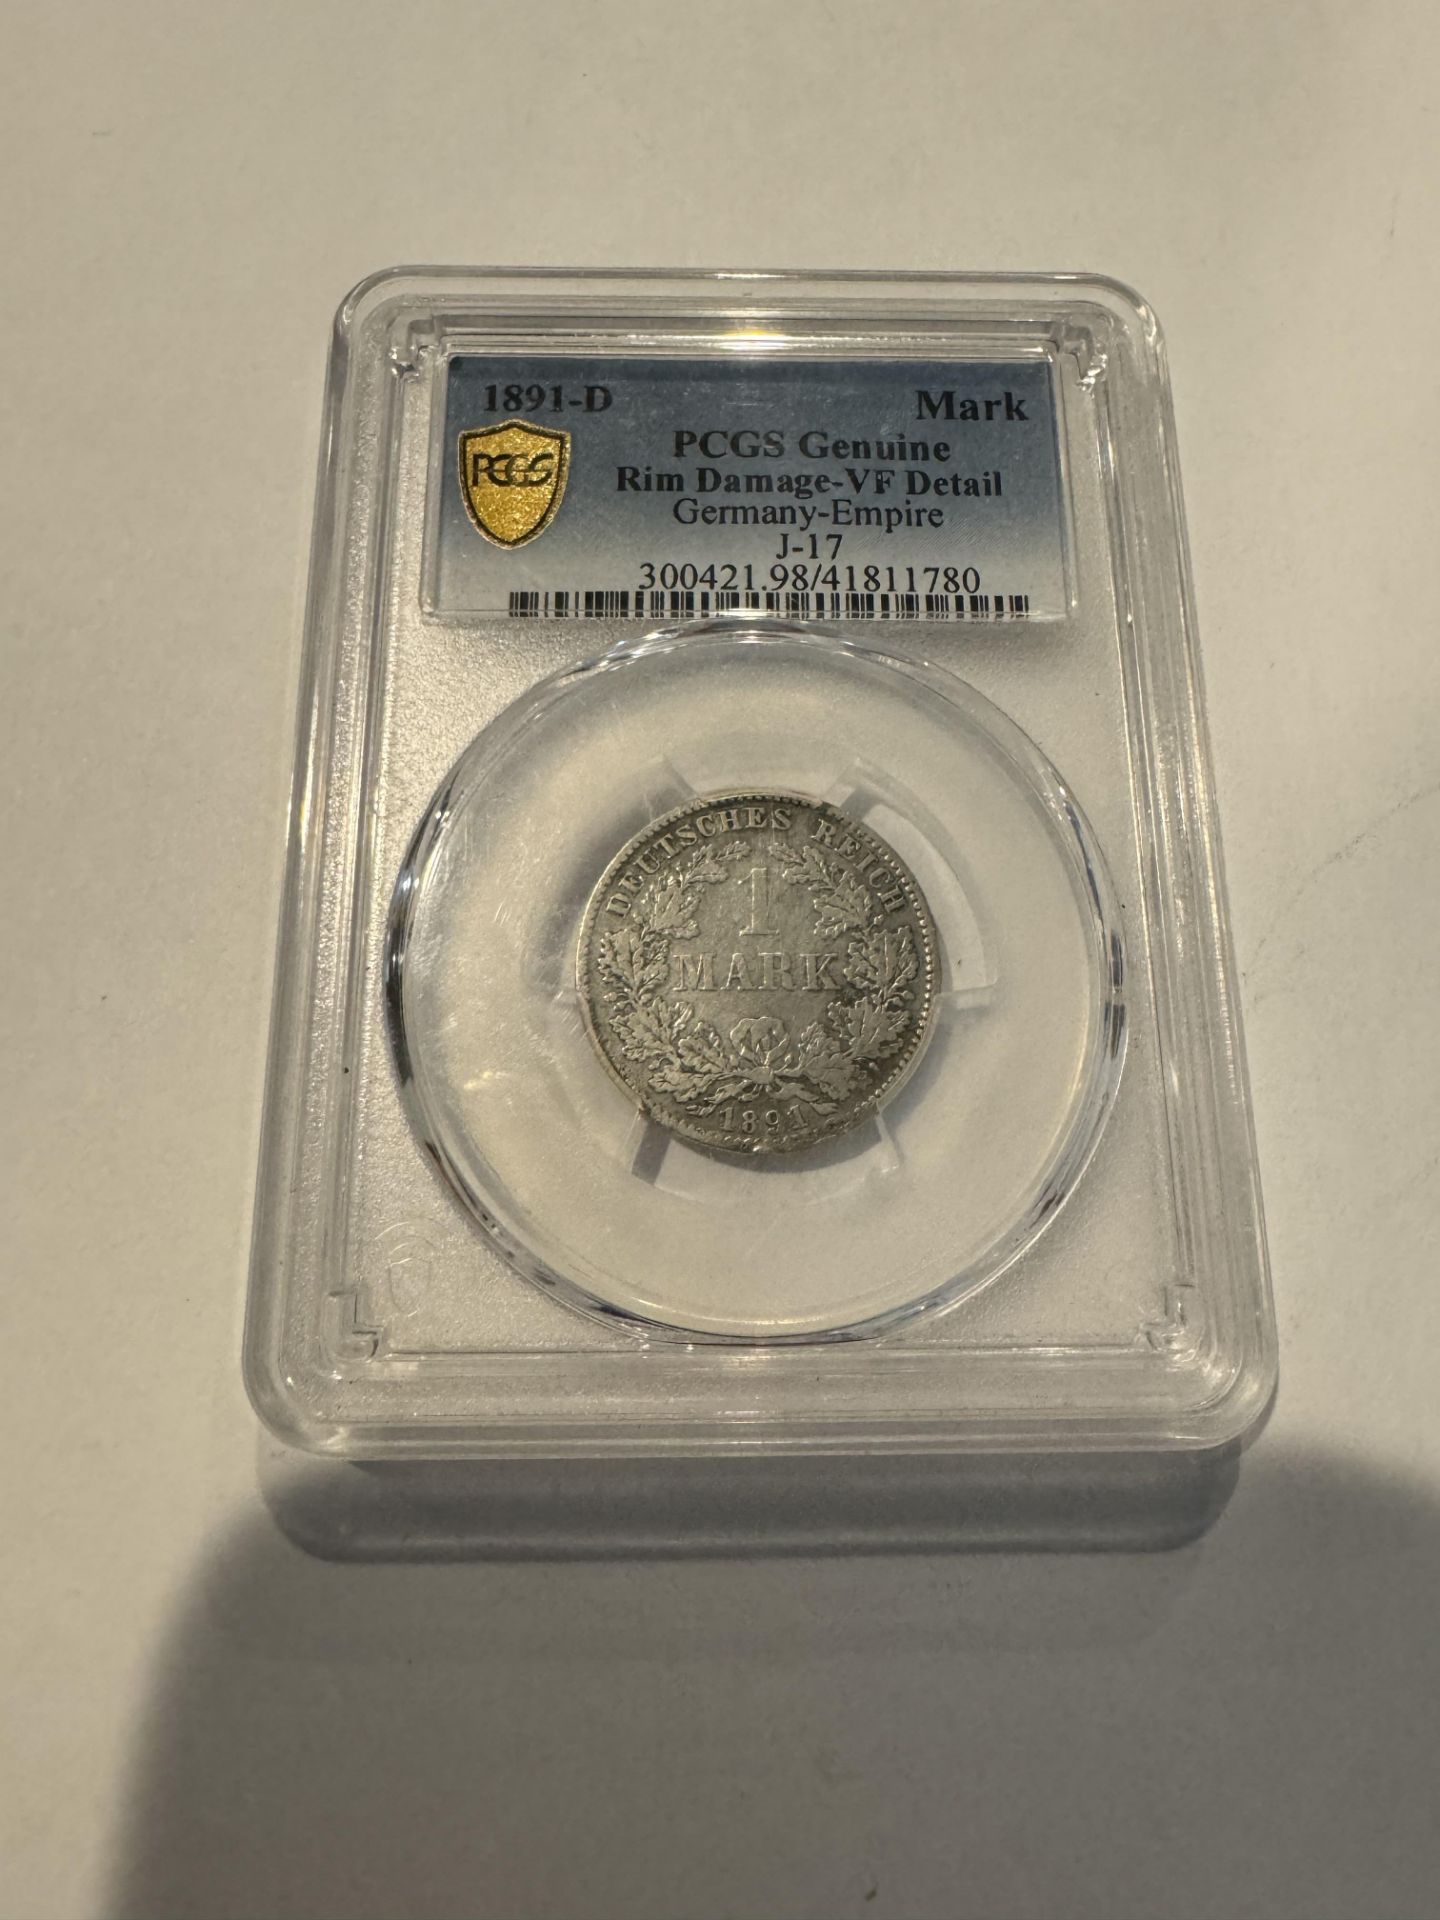 1891-D Mark PCGS Genuine Rim Damage VF Detail Germany-Empire 1 of only 2 in the world